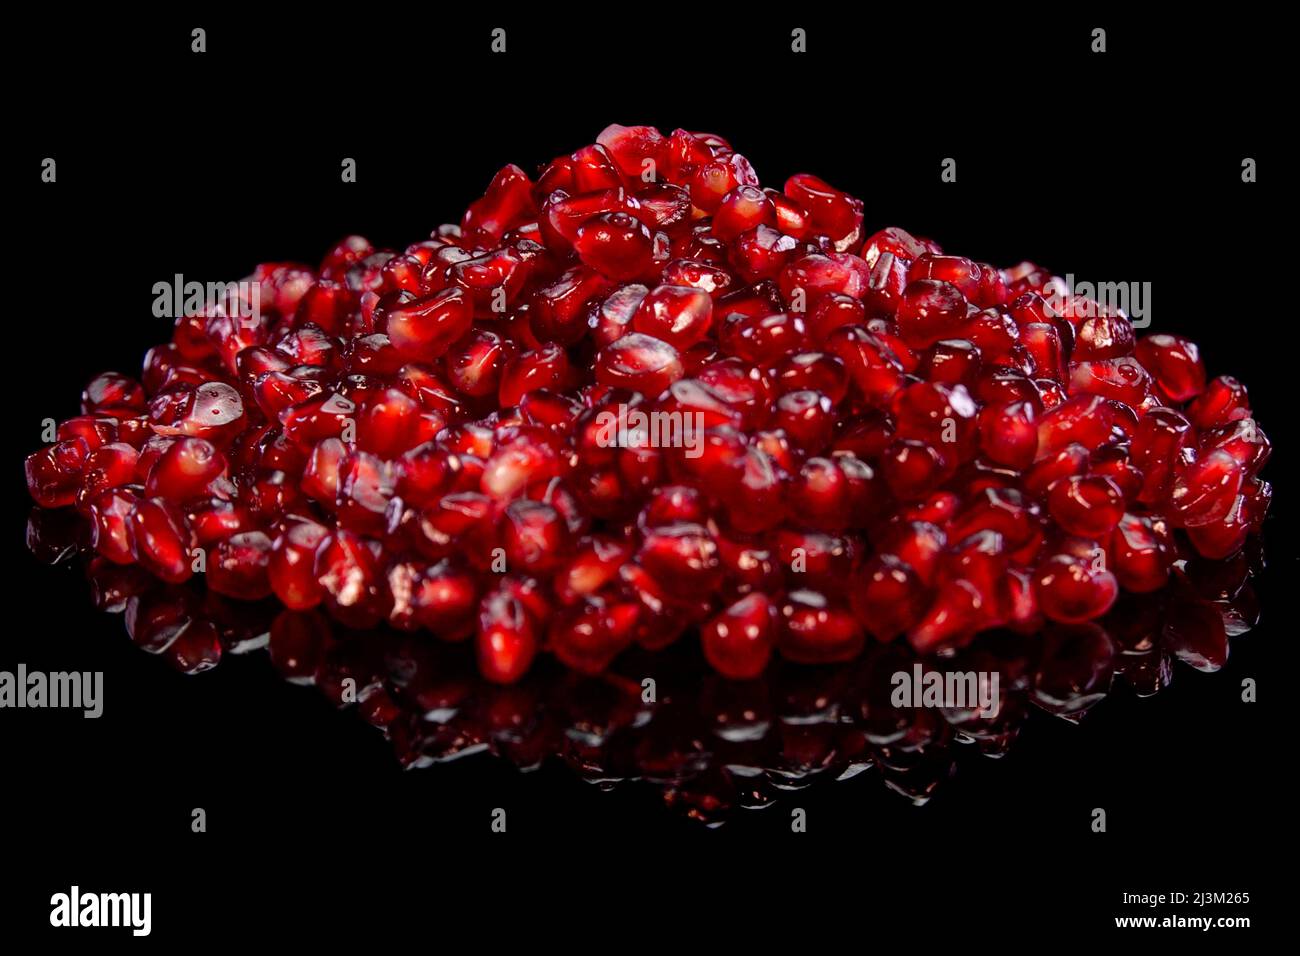 Heap of pomegranate grains close up. Red seeds of grenade macro view. Stock Photo